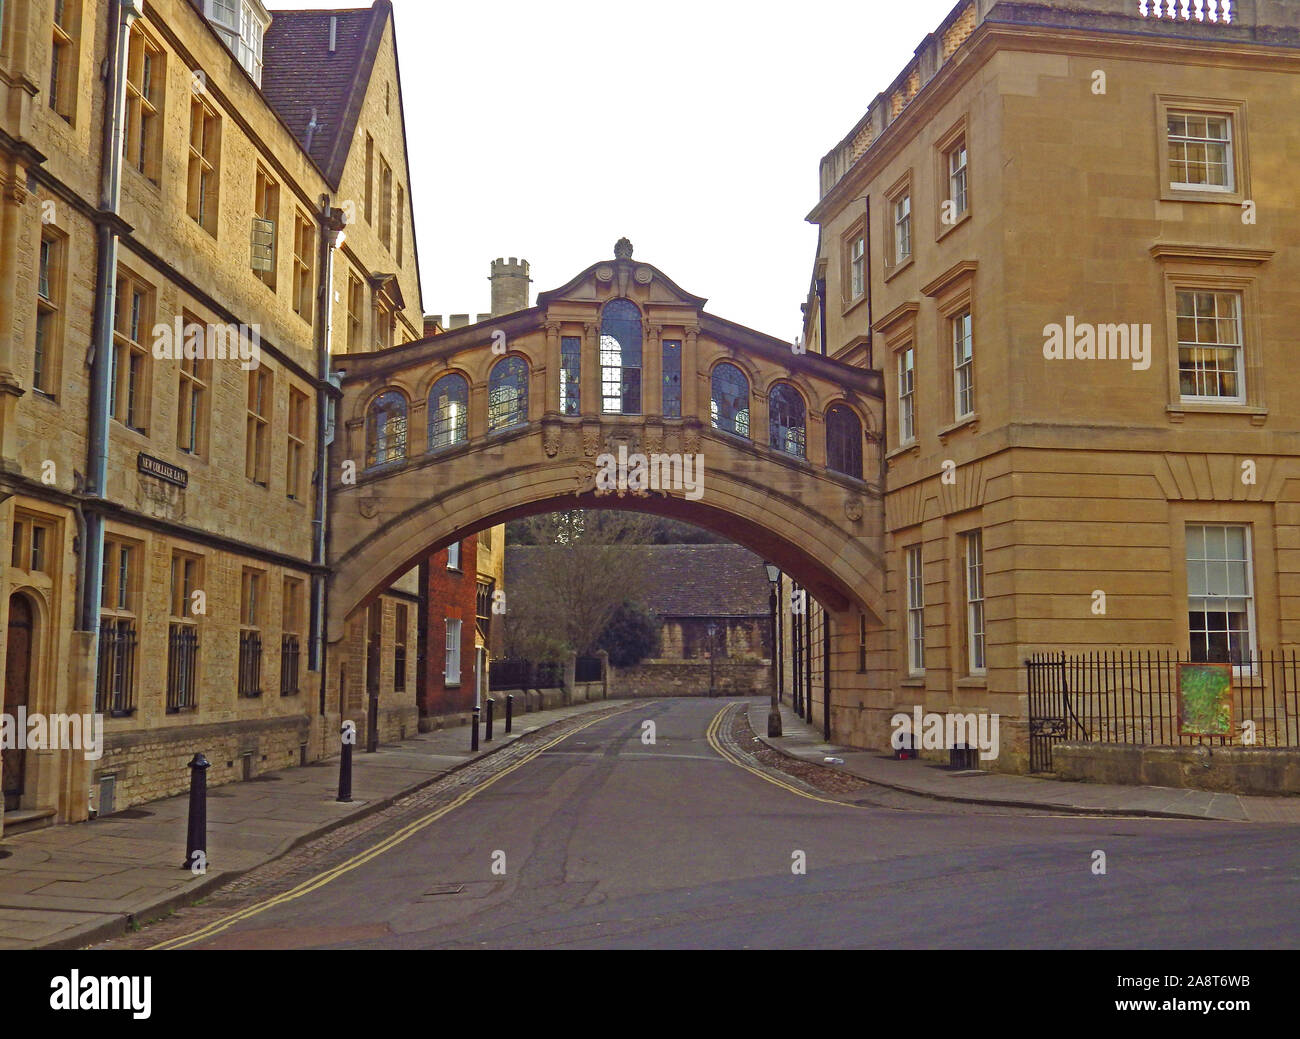 Hertford college bridge in Oxford England connecting 2 college buildings also called the Bridge of Sighs like in Venice but it's more like the Rialto Stock Photo